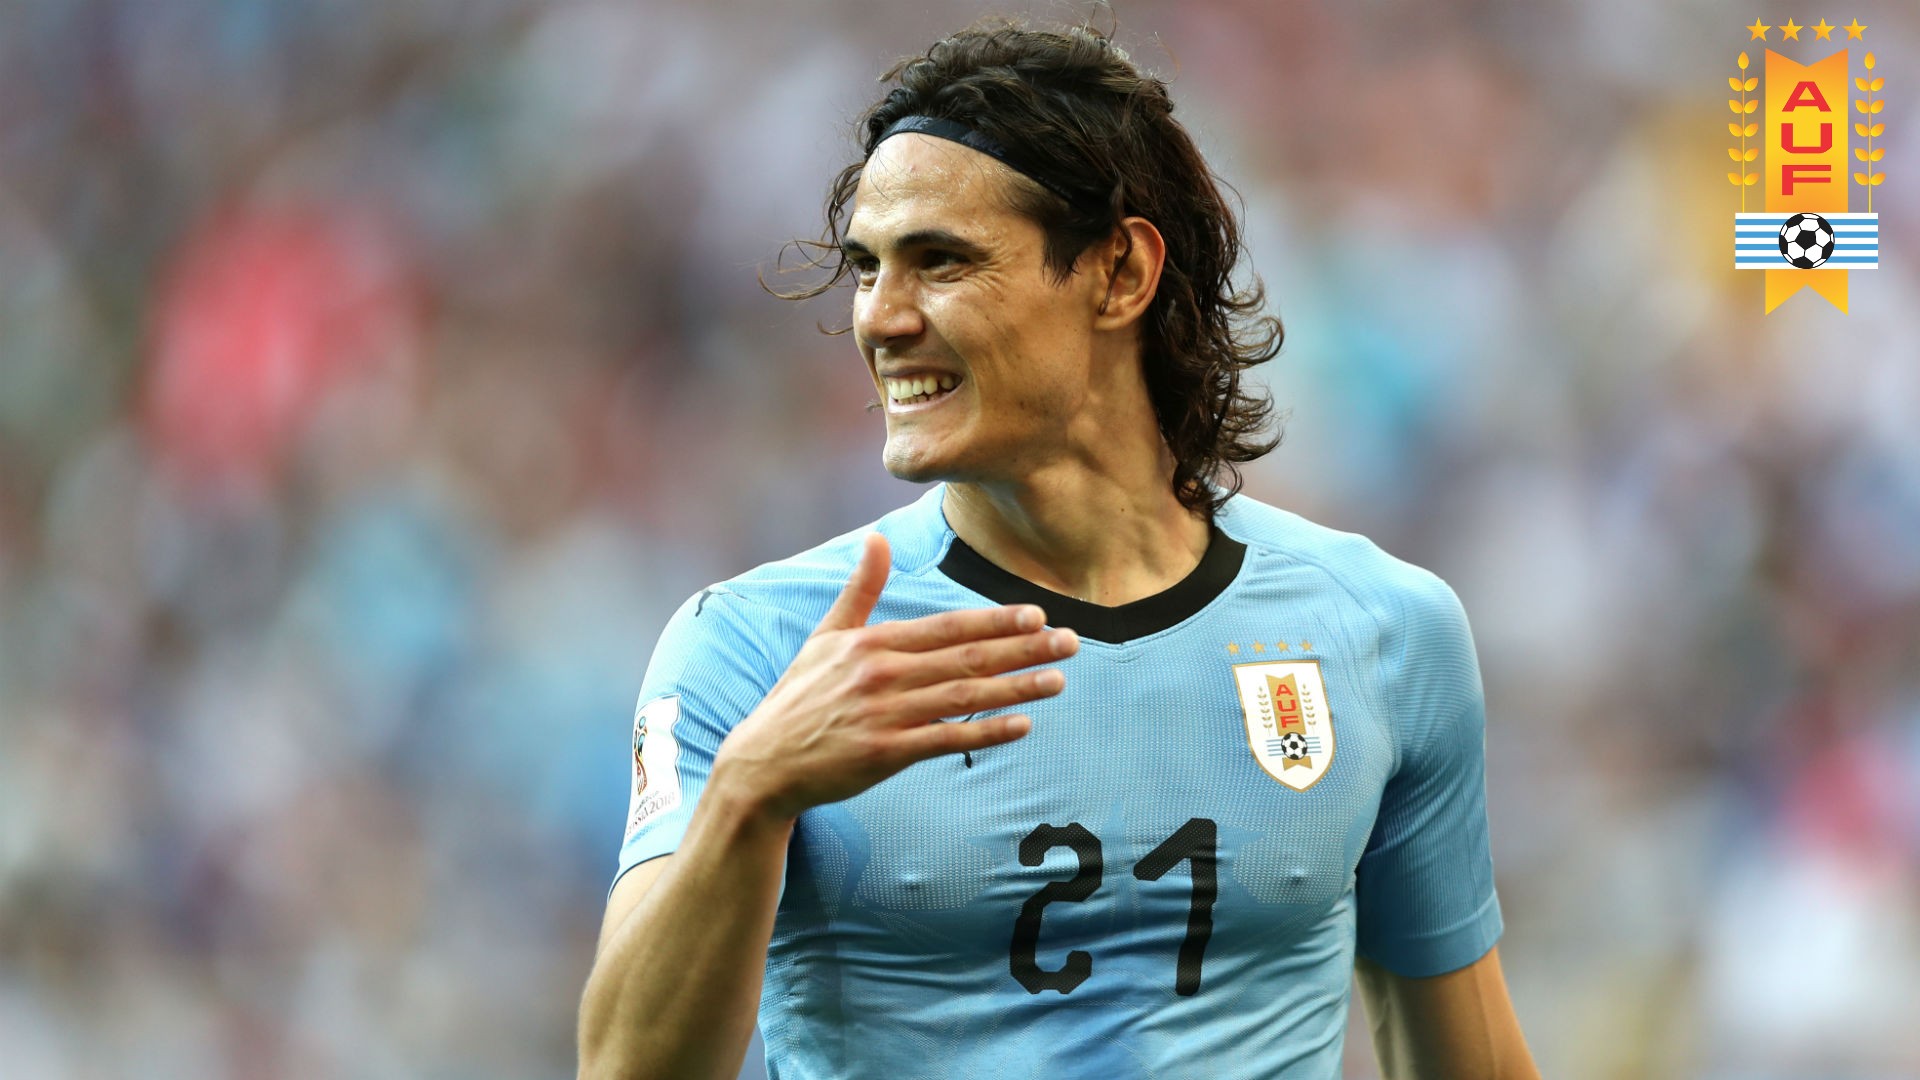 Edinson Cavani Uruguay Wallpaper HD With Resolution 1920X1080 pixel. You can make this wallpaper for your Mac or Windows Desktop Background, iPhone, Android or Tablet and another Smartphone device for free